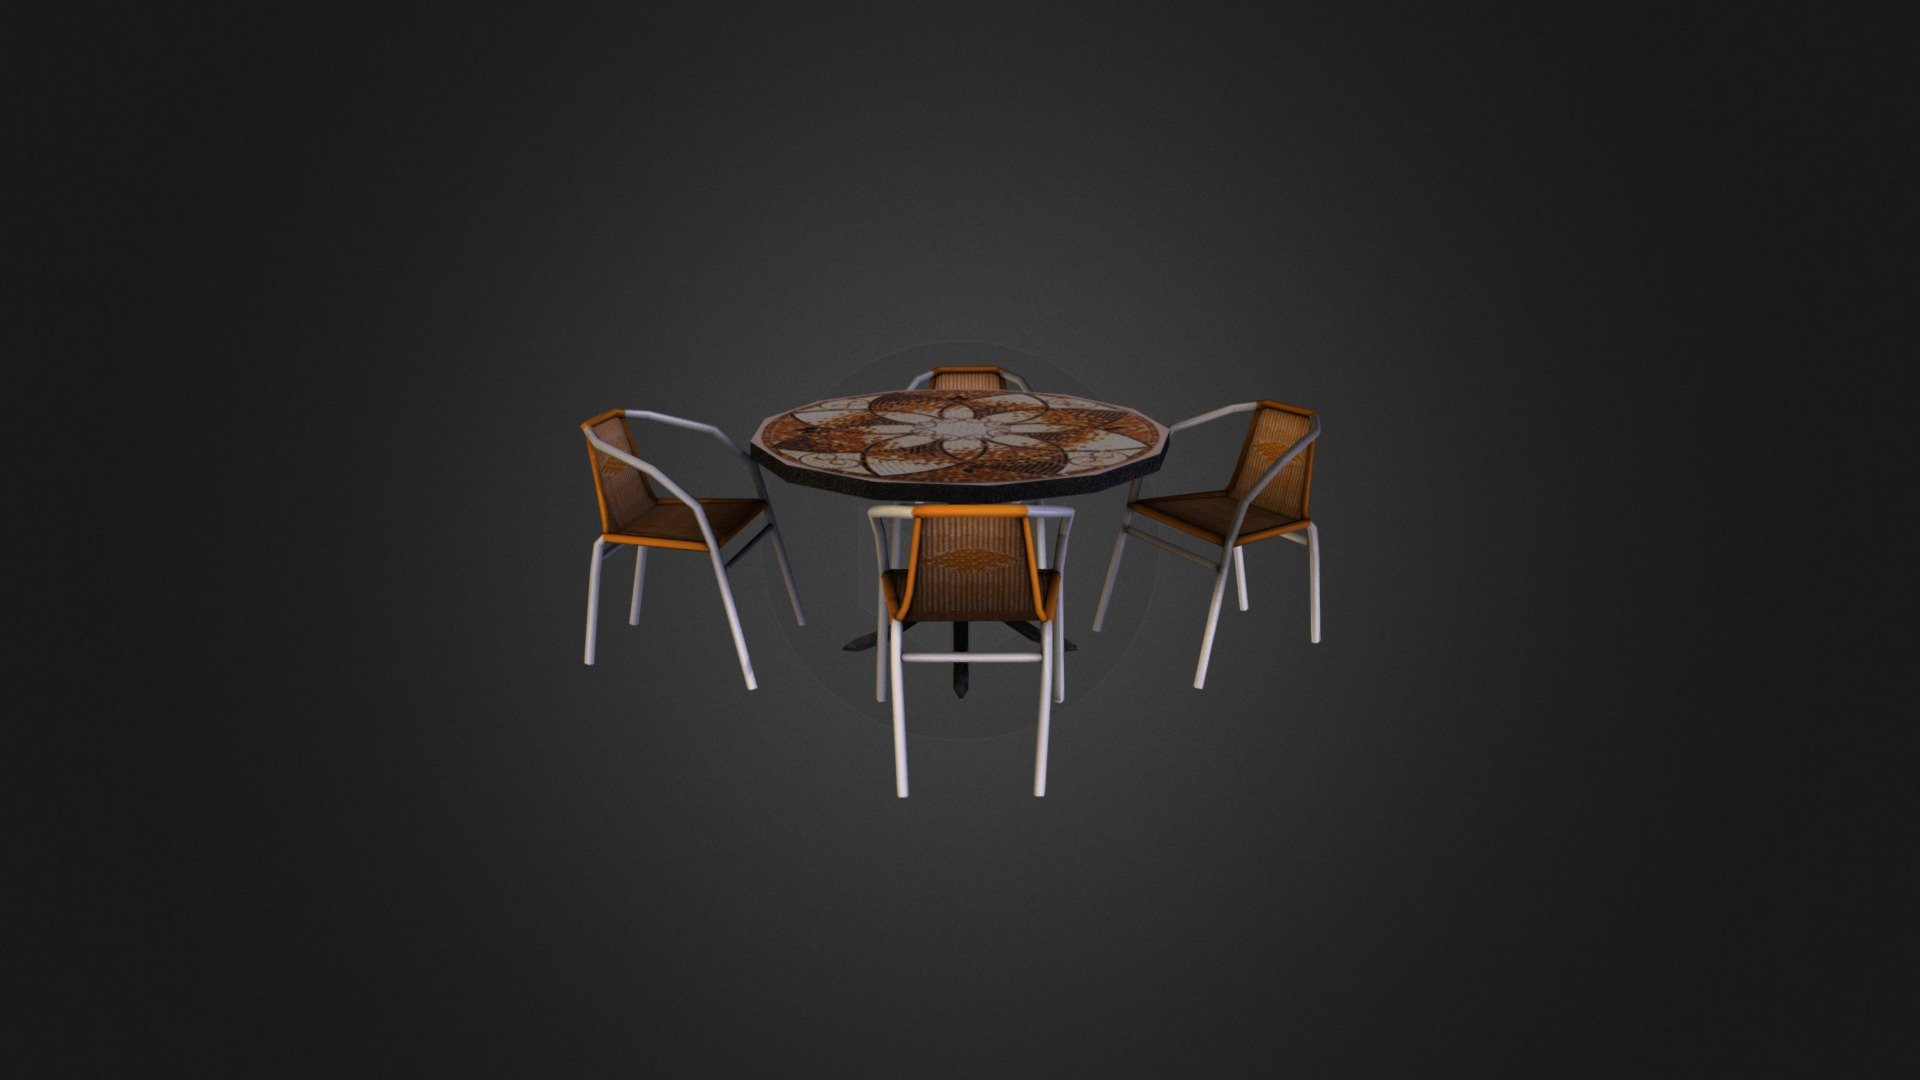 I made this for a city scene in sicily.  - Low poly table with chairs - 3D model by Ameye Guillaume (@ameye.guillaume) 3d model